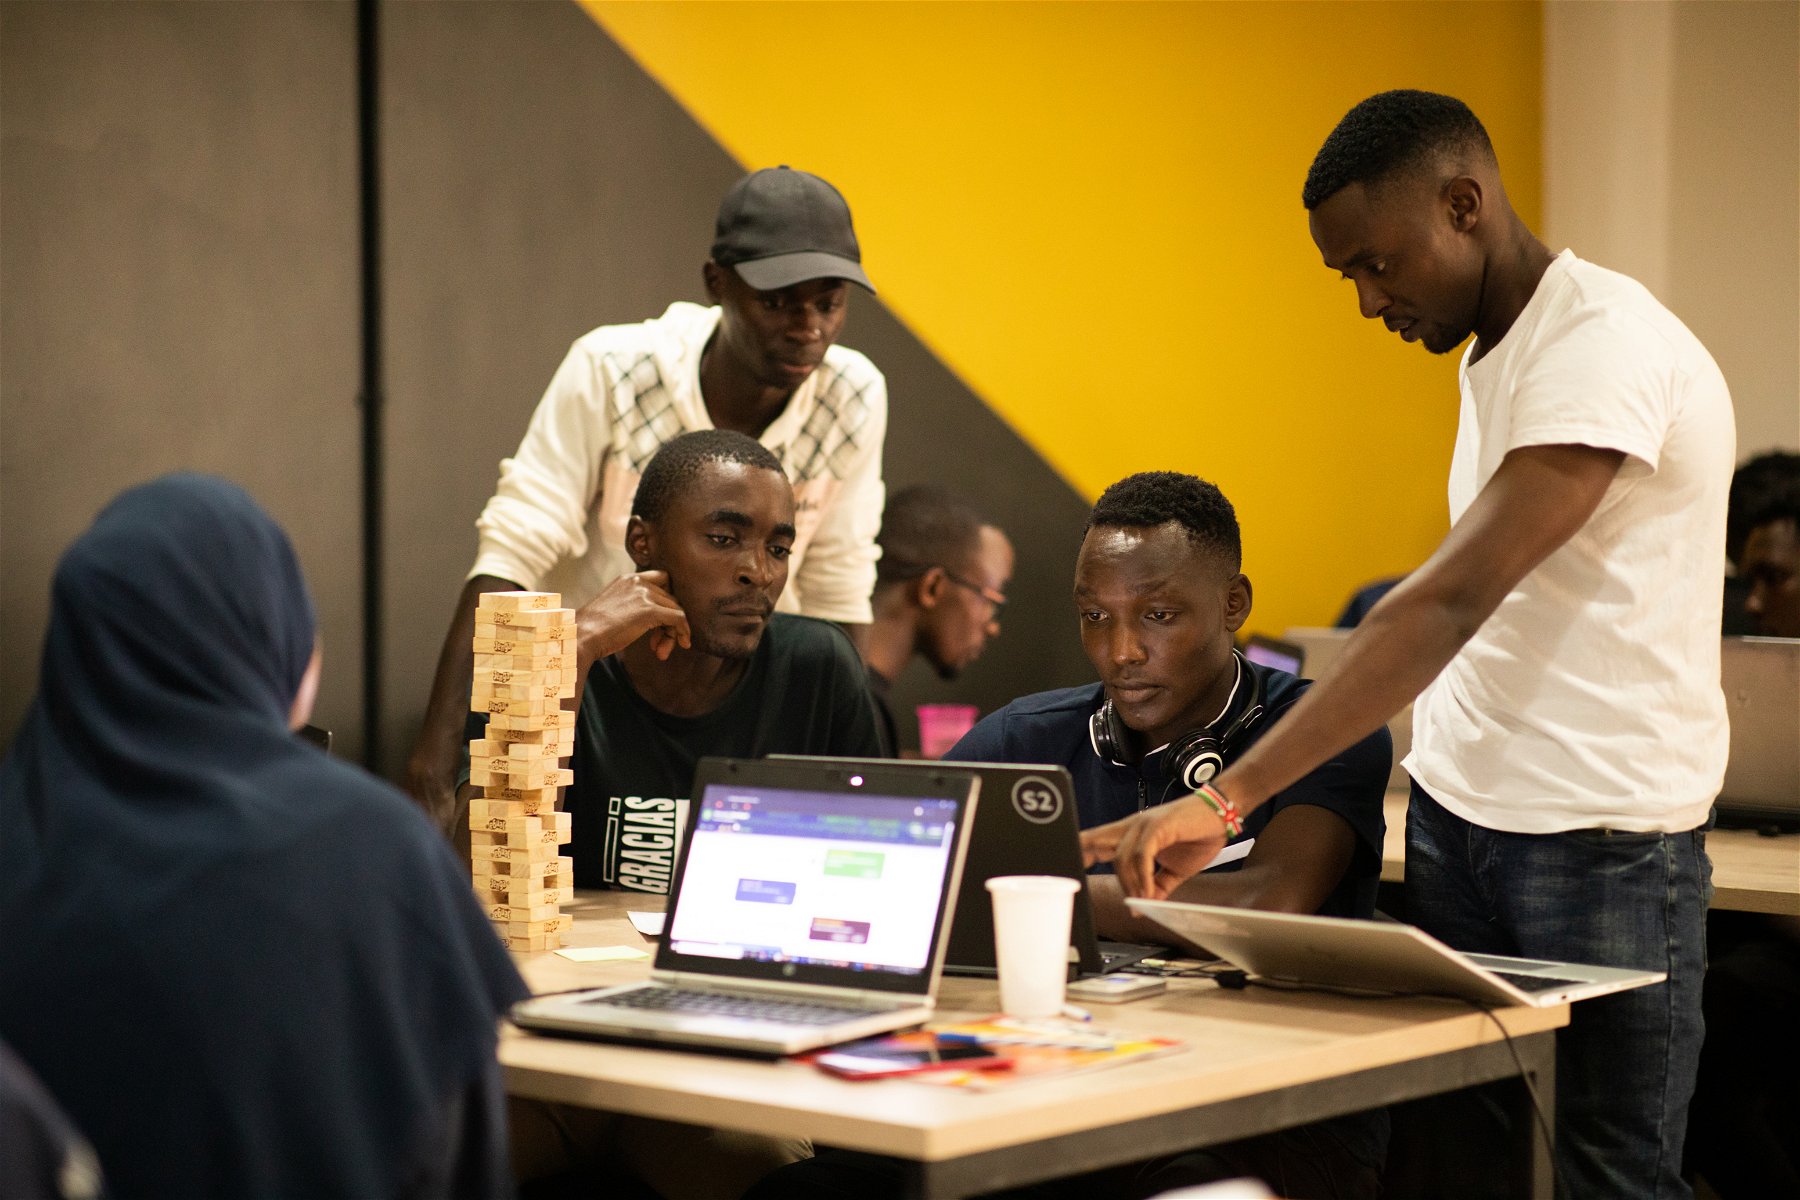 A group of young men and a woman is working on laptops.